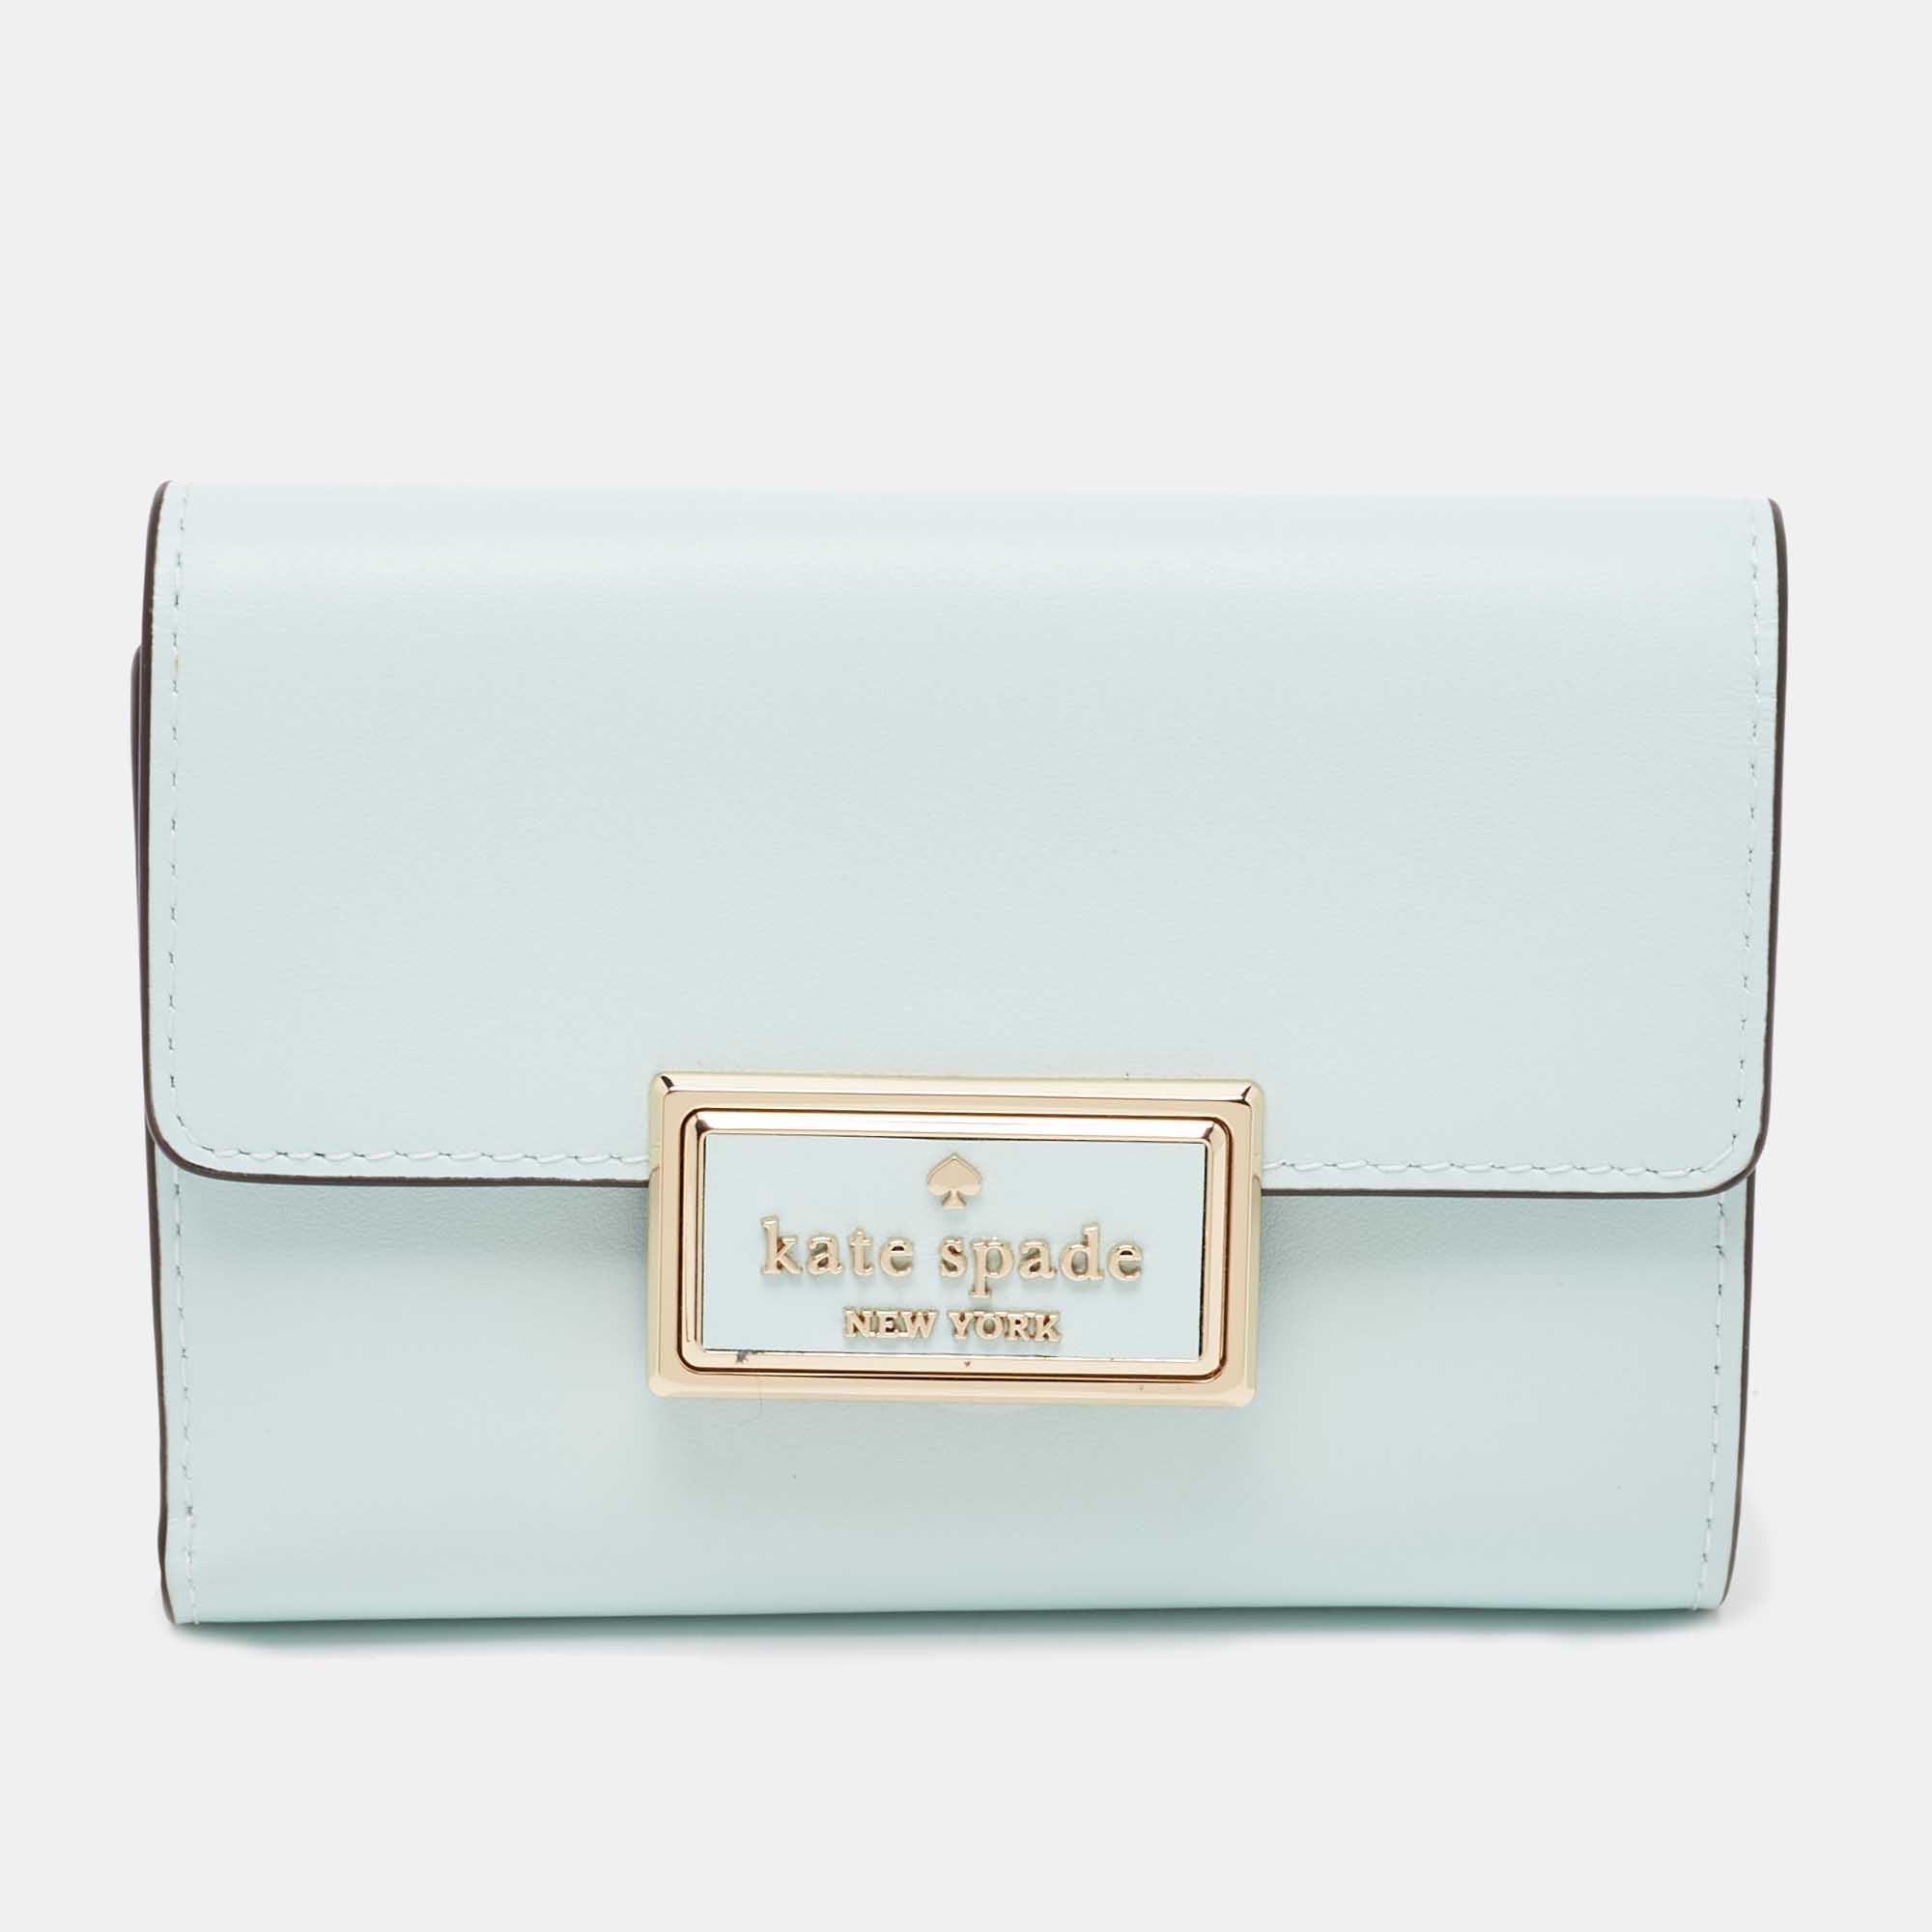 Pre-owned Kate Spade Light Blue Leather Reegan Trifold Wallet